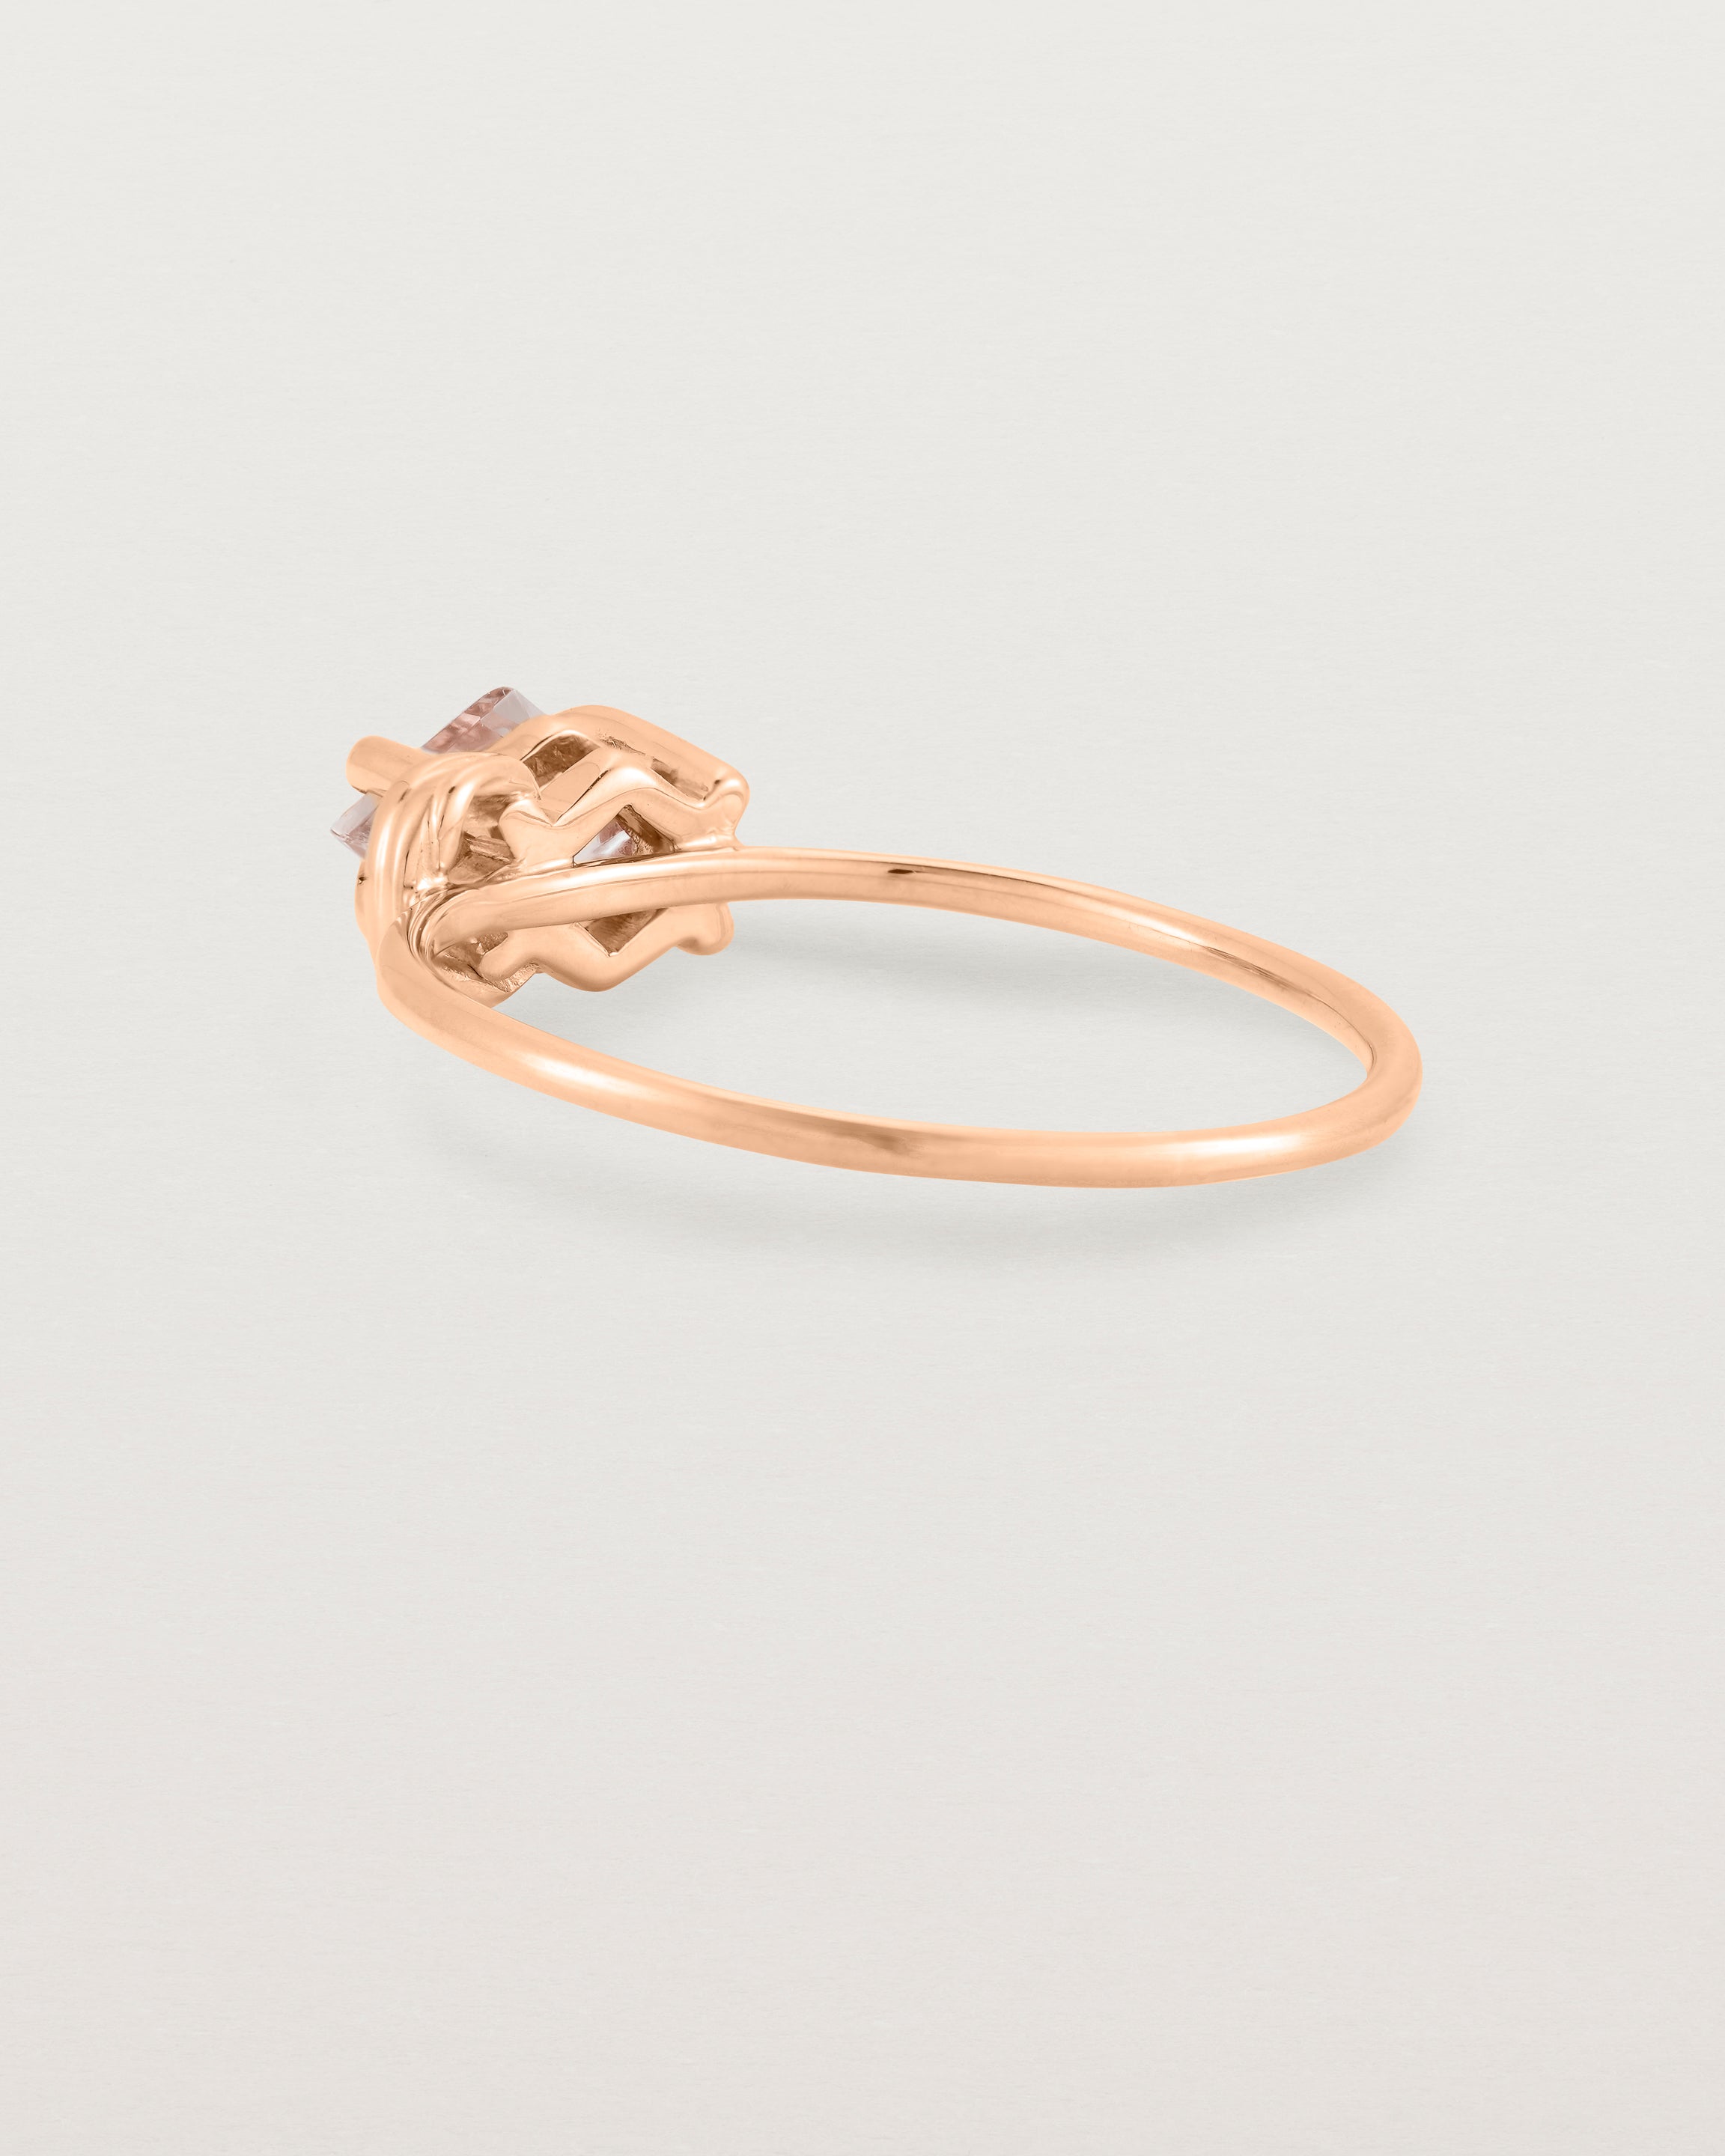 Back view of the Nuna Ring | Savannah Sunstone in Rose Gold.